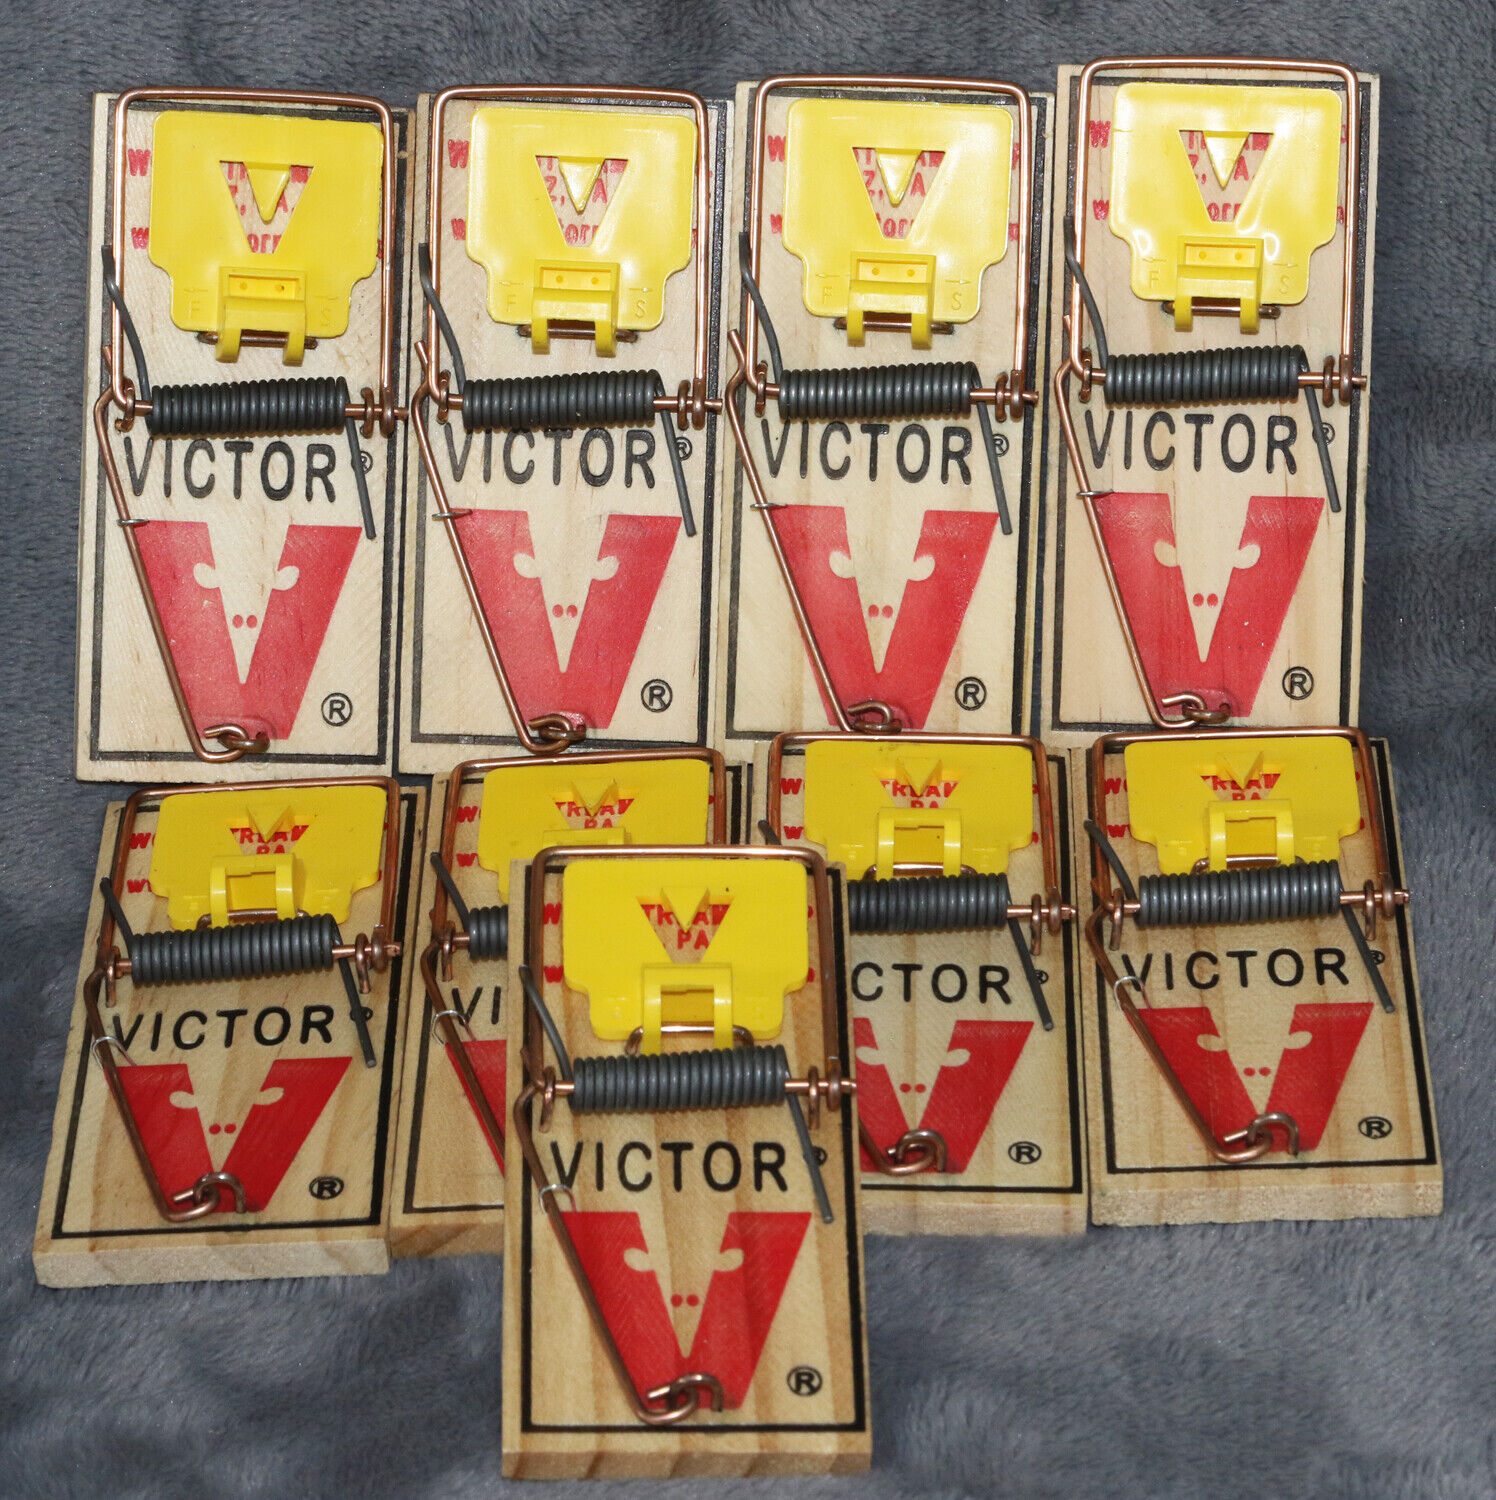 Lot of 9 Industrial Victor M035 Easy Set Disposable Mouse Rodent Traps Brand New